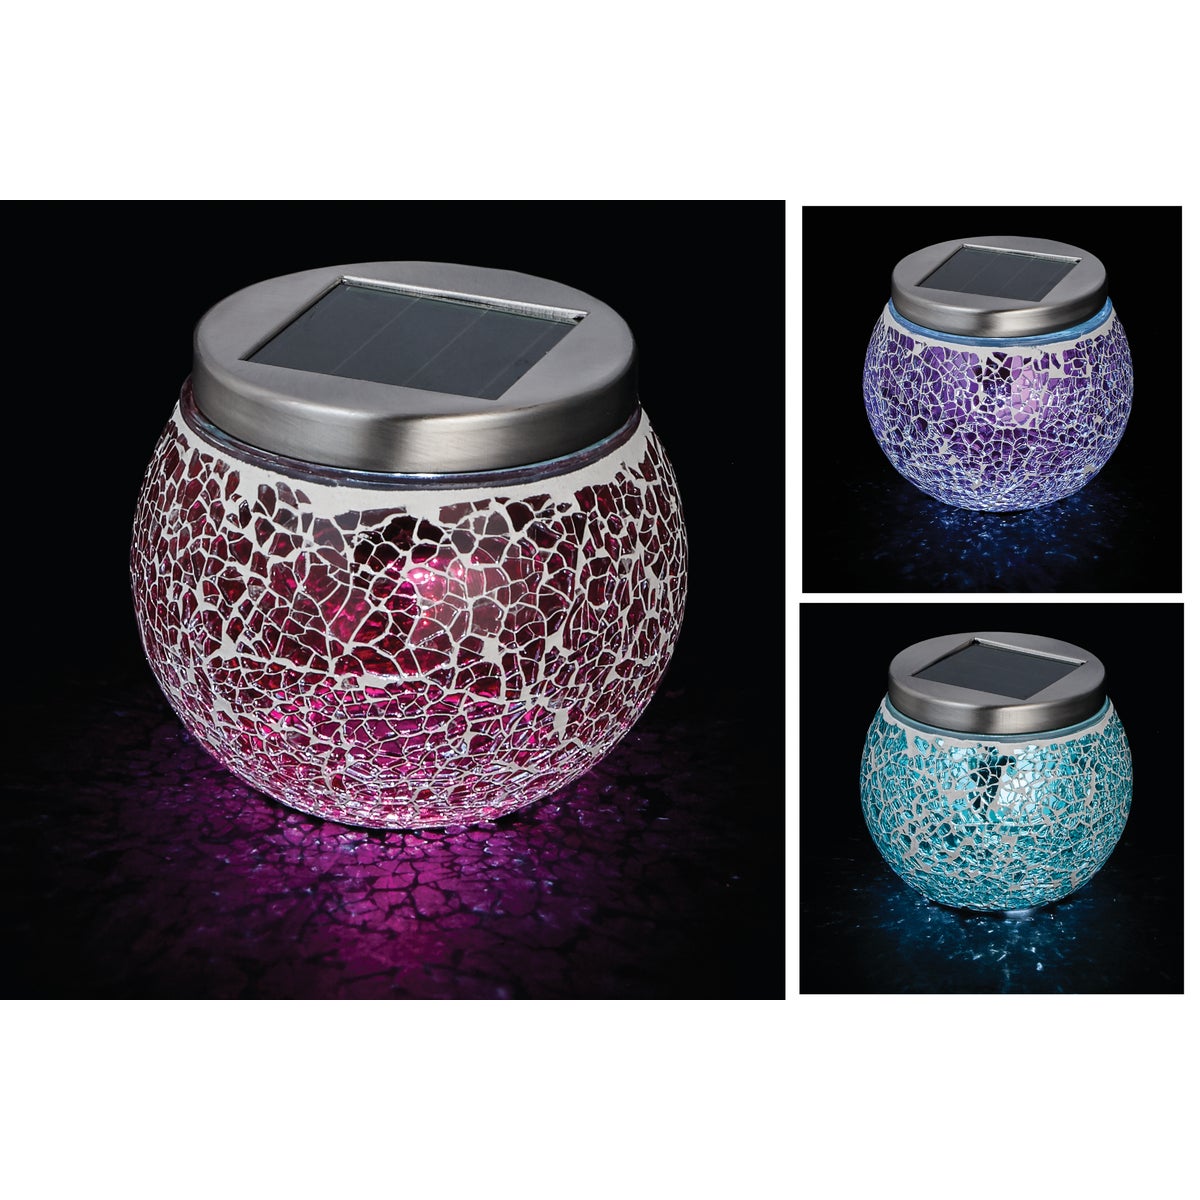 Item 802003, Decorative solar powered tabletop glass globe light. Features a 2.